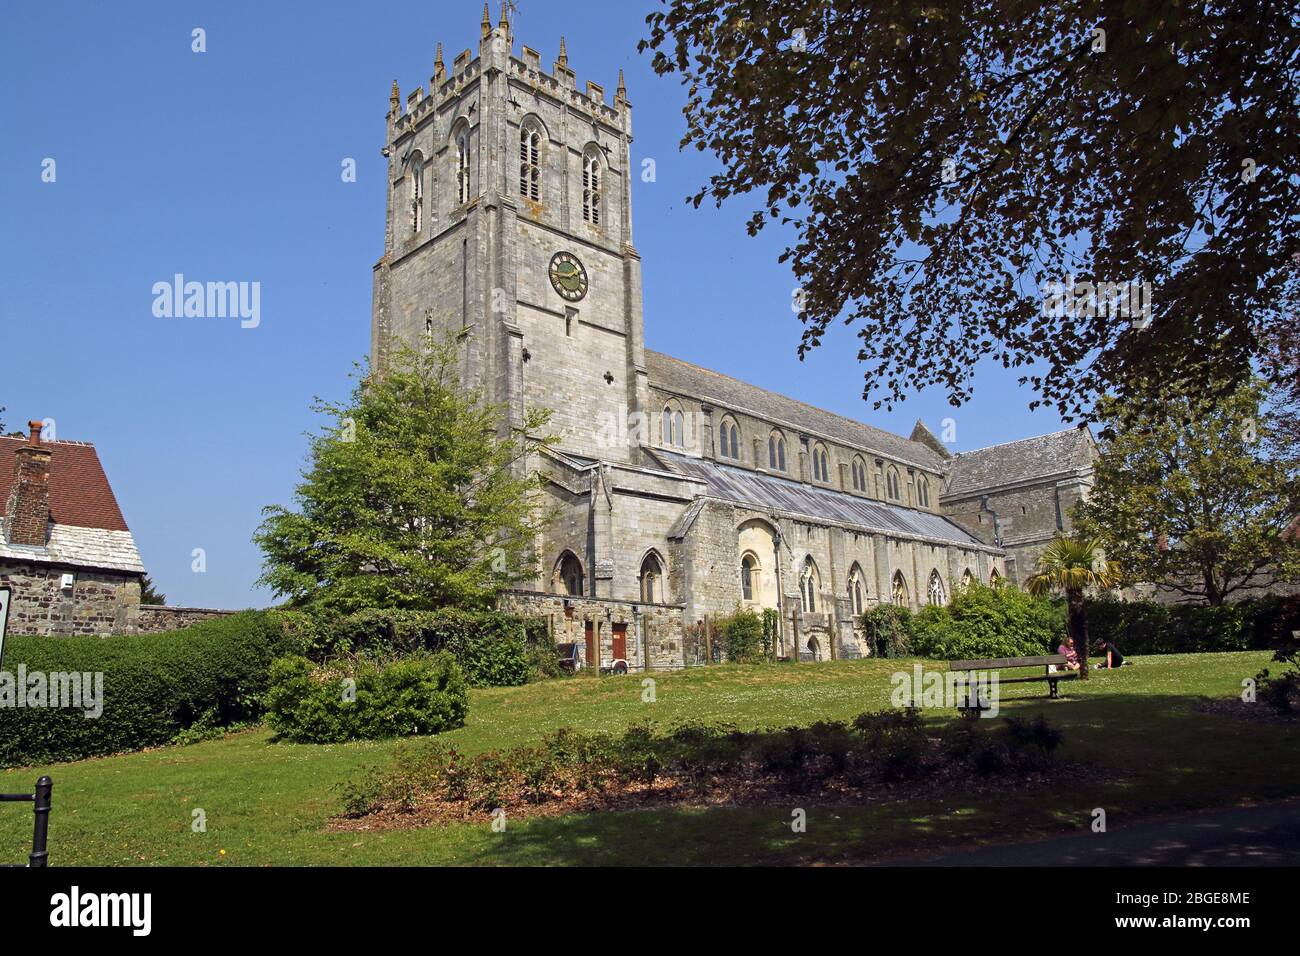 Christchurch Priory, Christchurch, Dorset, England. Dating from the 12th century it is the longest parish church in England. Stock Photo